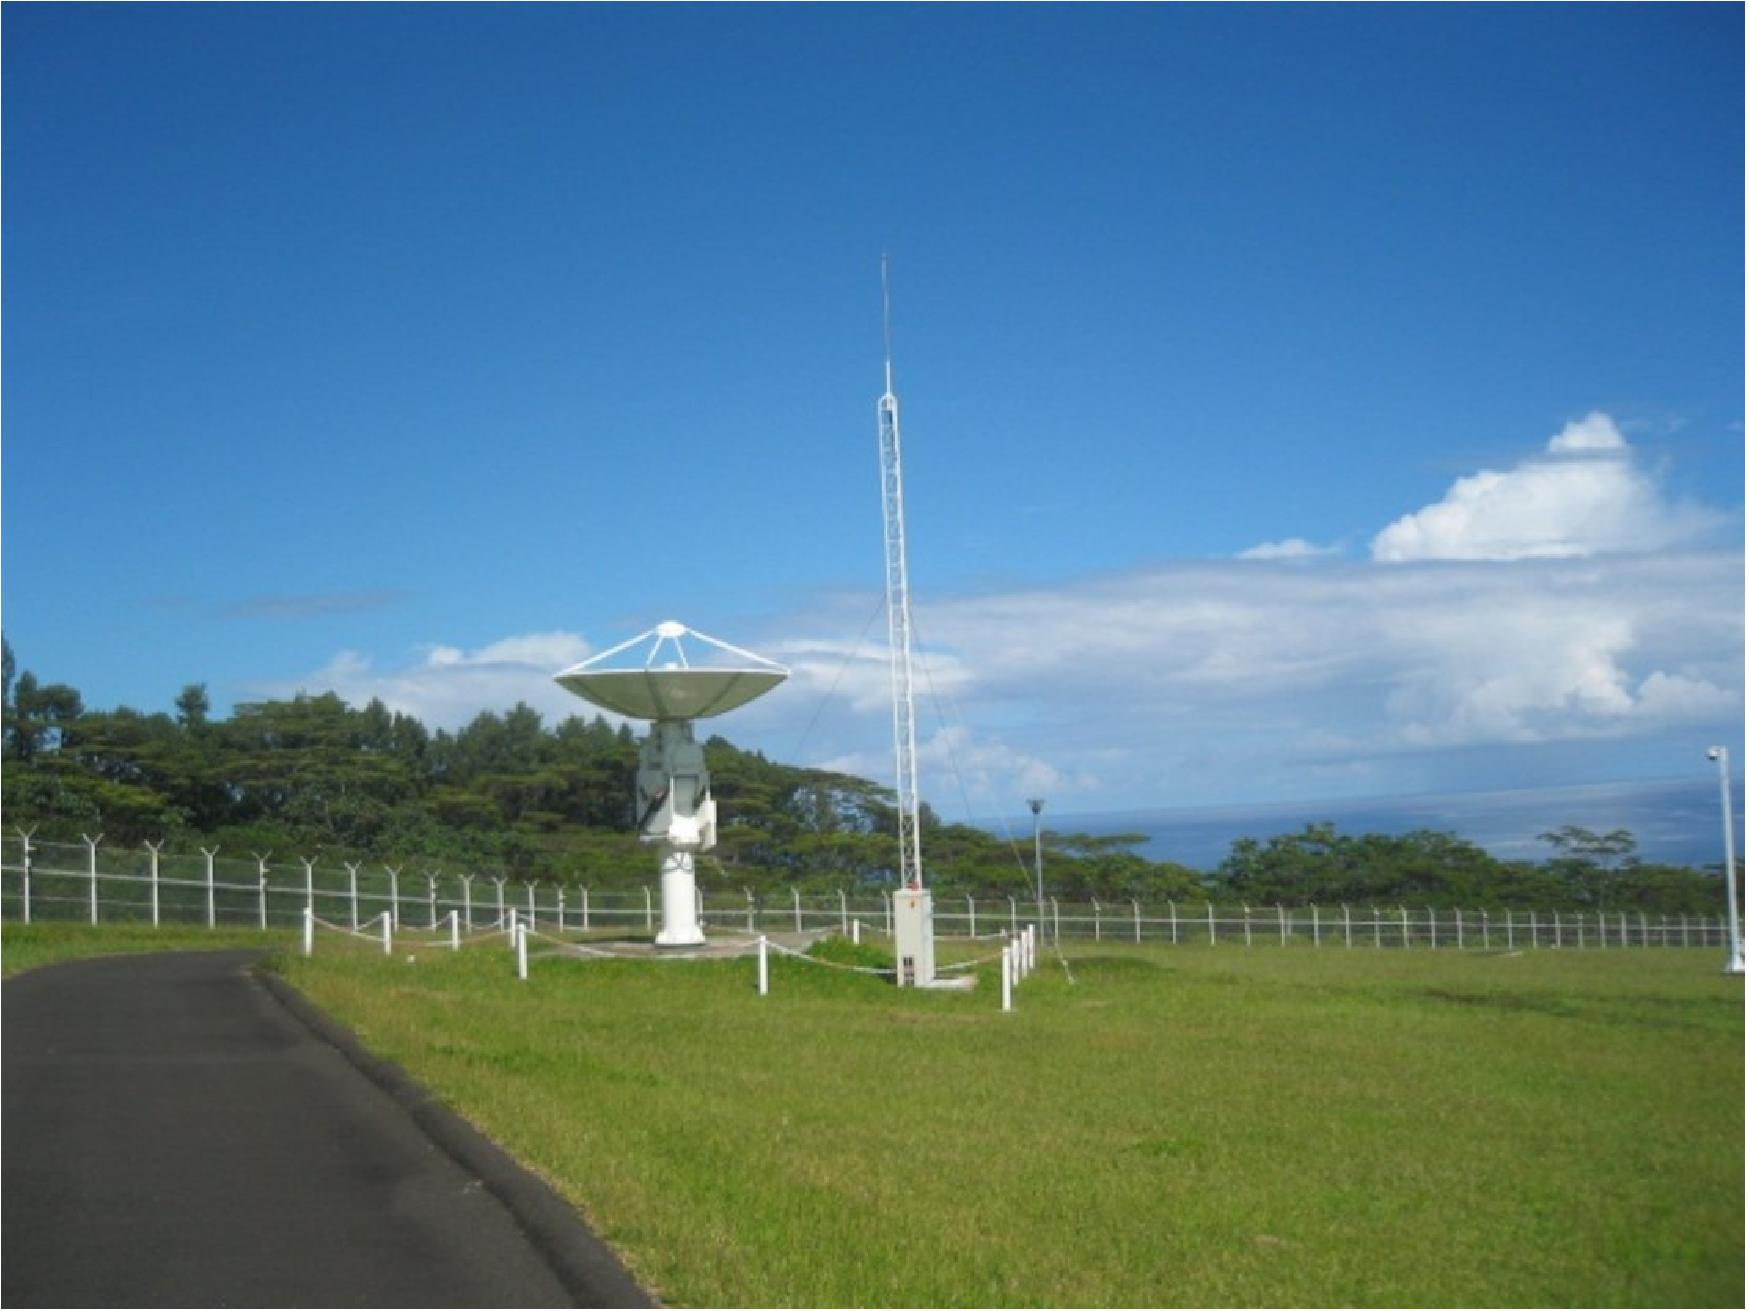 Figure 110: Photo of the new Papette Uplink Station in Tahiti, French Polynesia, used for uplinking navigation messages for rebroadcast to users from Galileo satellite (image credit: ESA) 140)